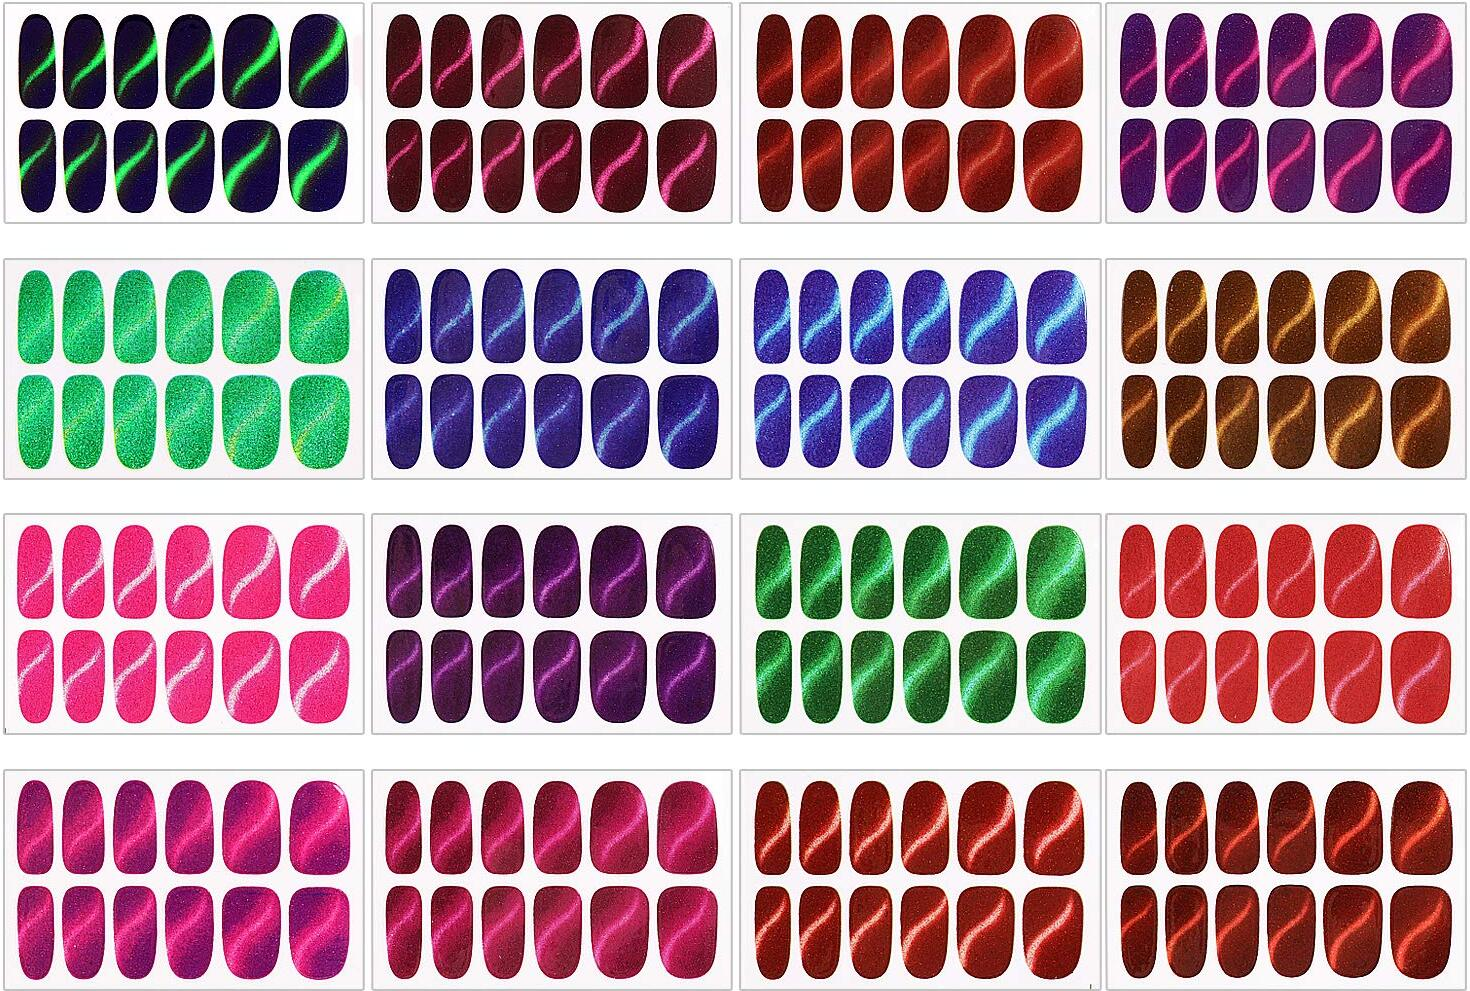 Color pallette for nail wraps and stickers